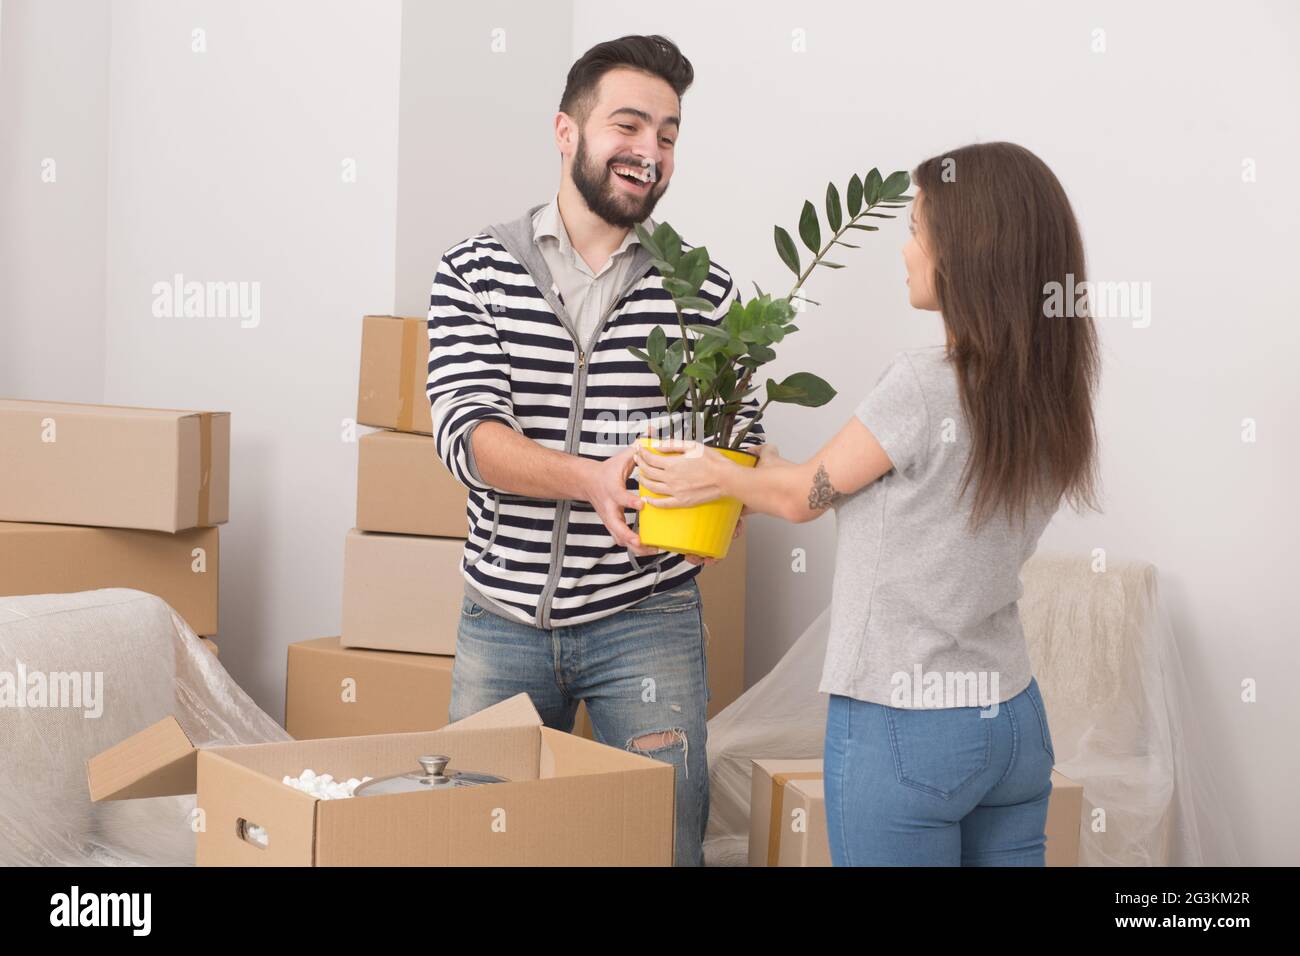 Excited young couple moving home standing close together with plants in their hands. Stock Photo